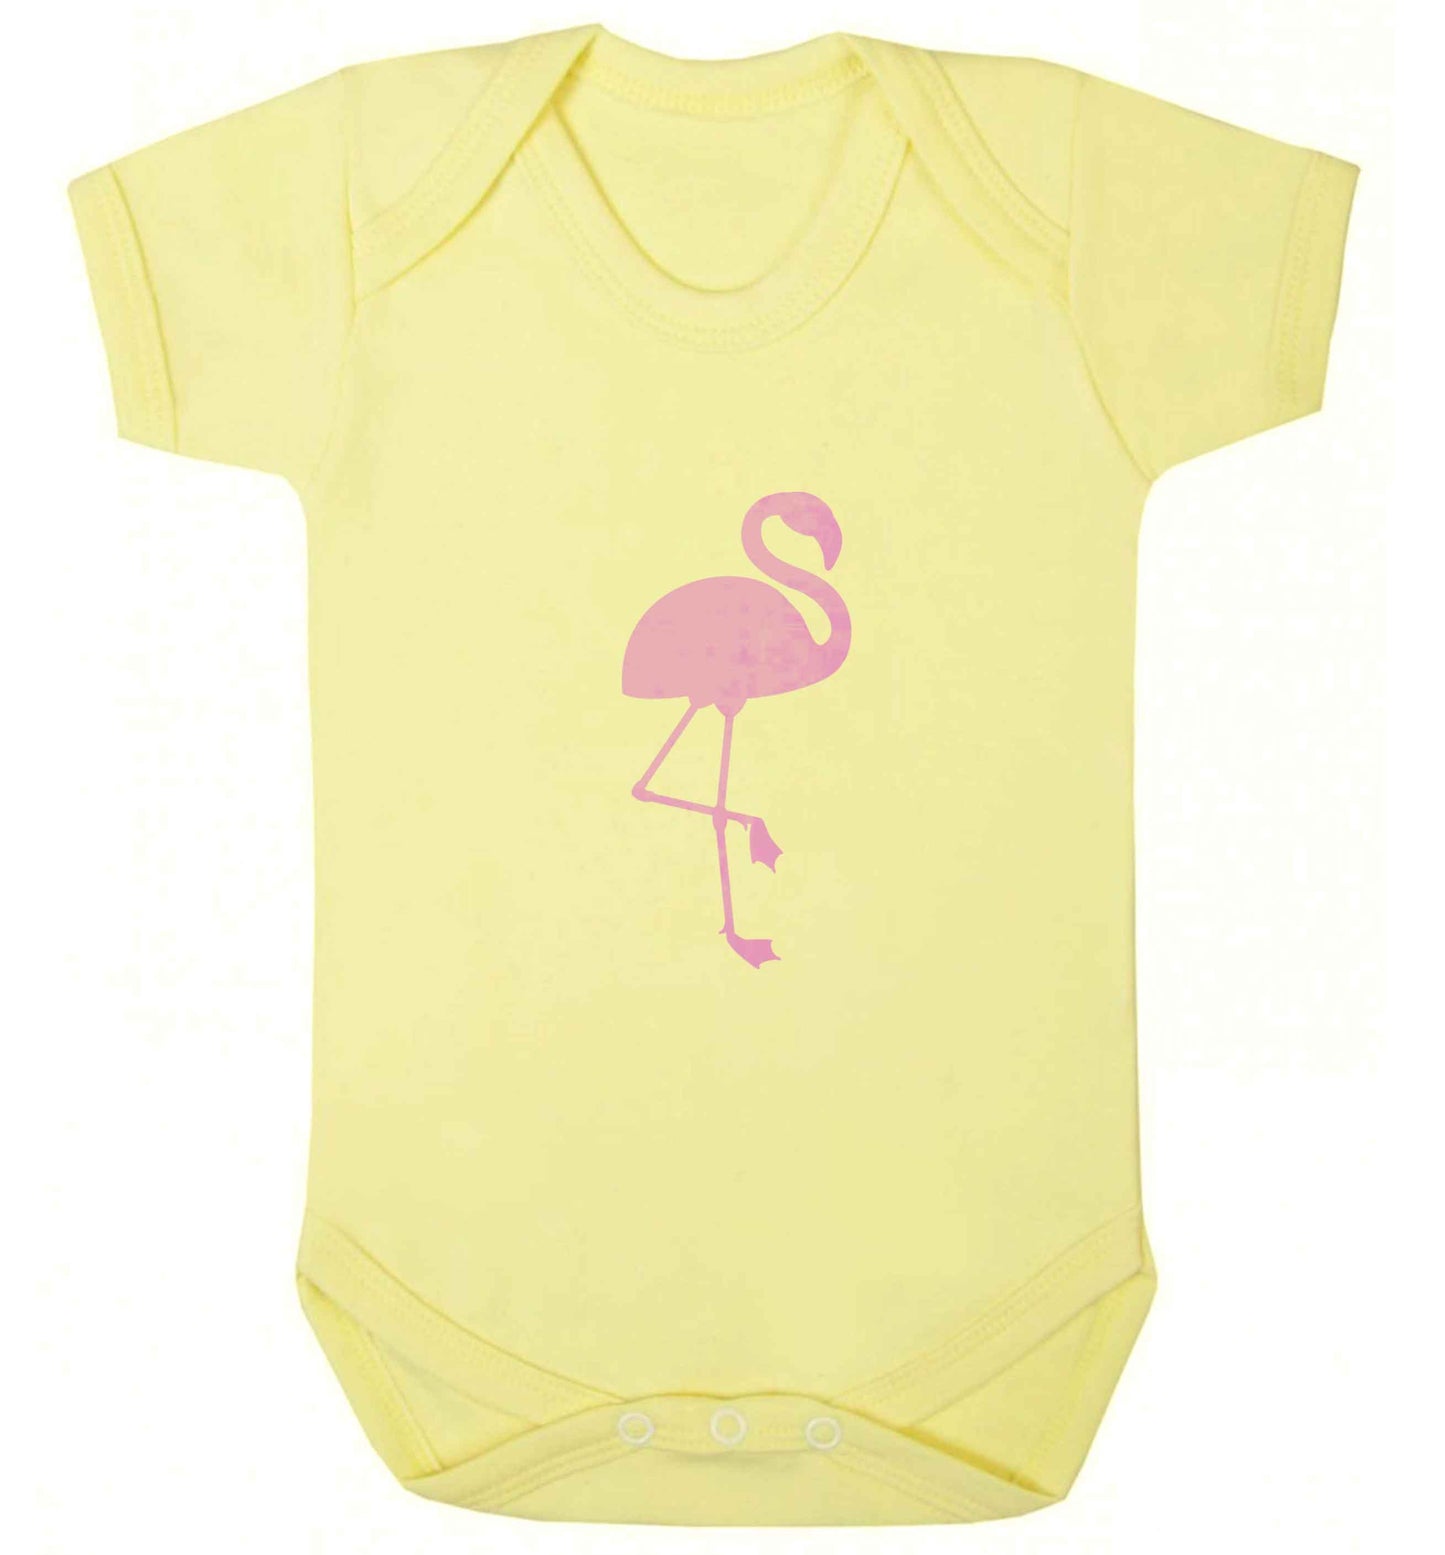 Pink flamingo baby vest pale yellow 18-24 months